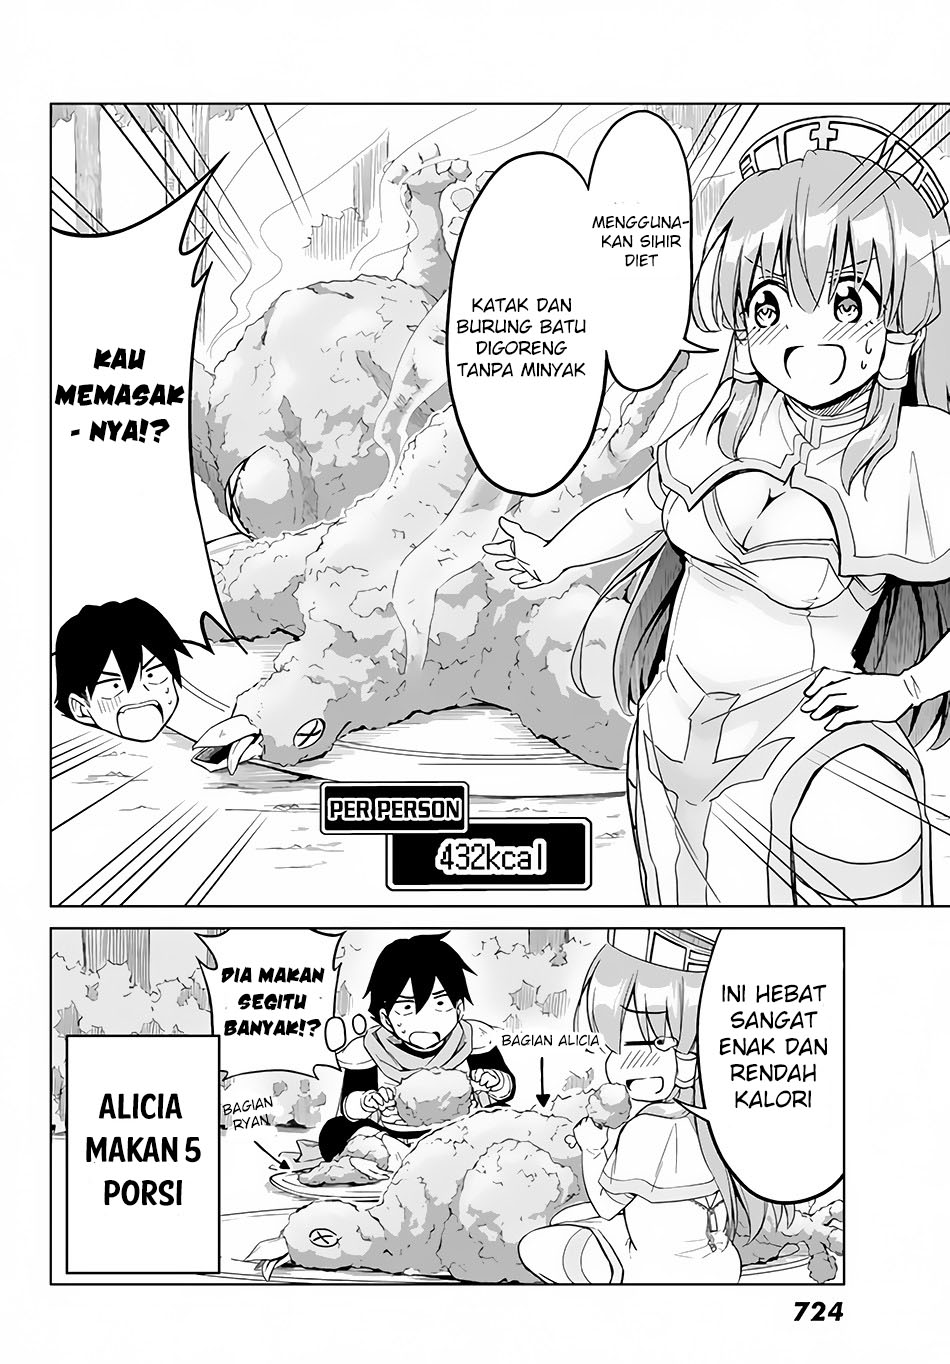 Alicia’s Diet Quest Chapter 4